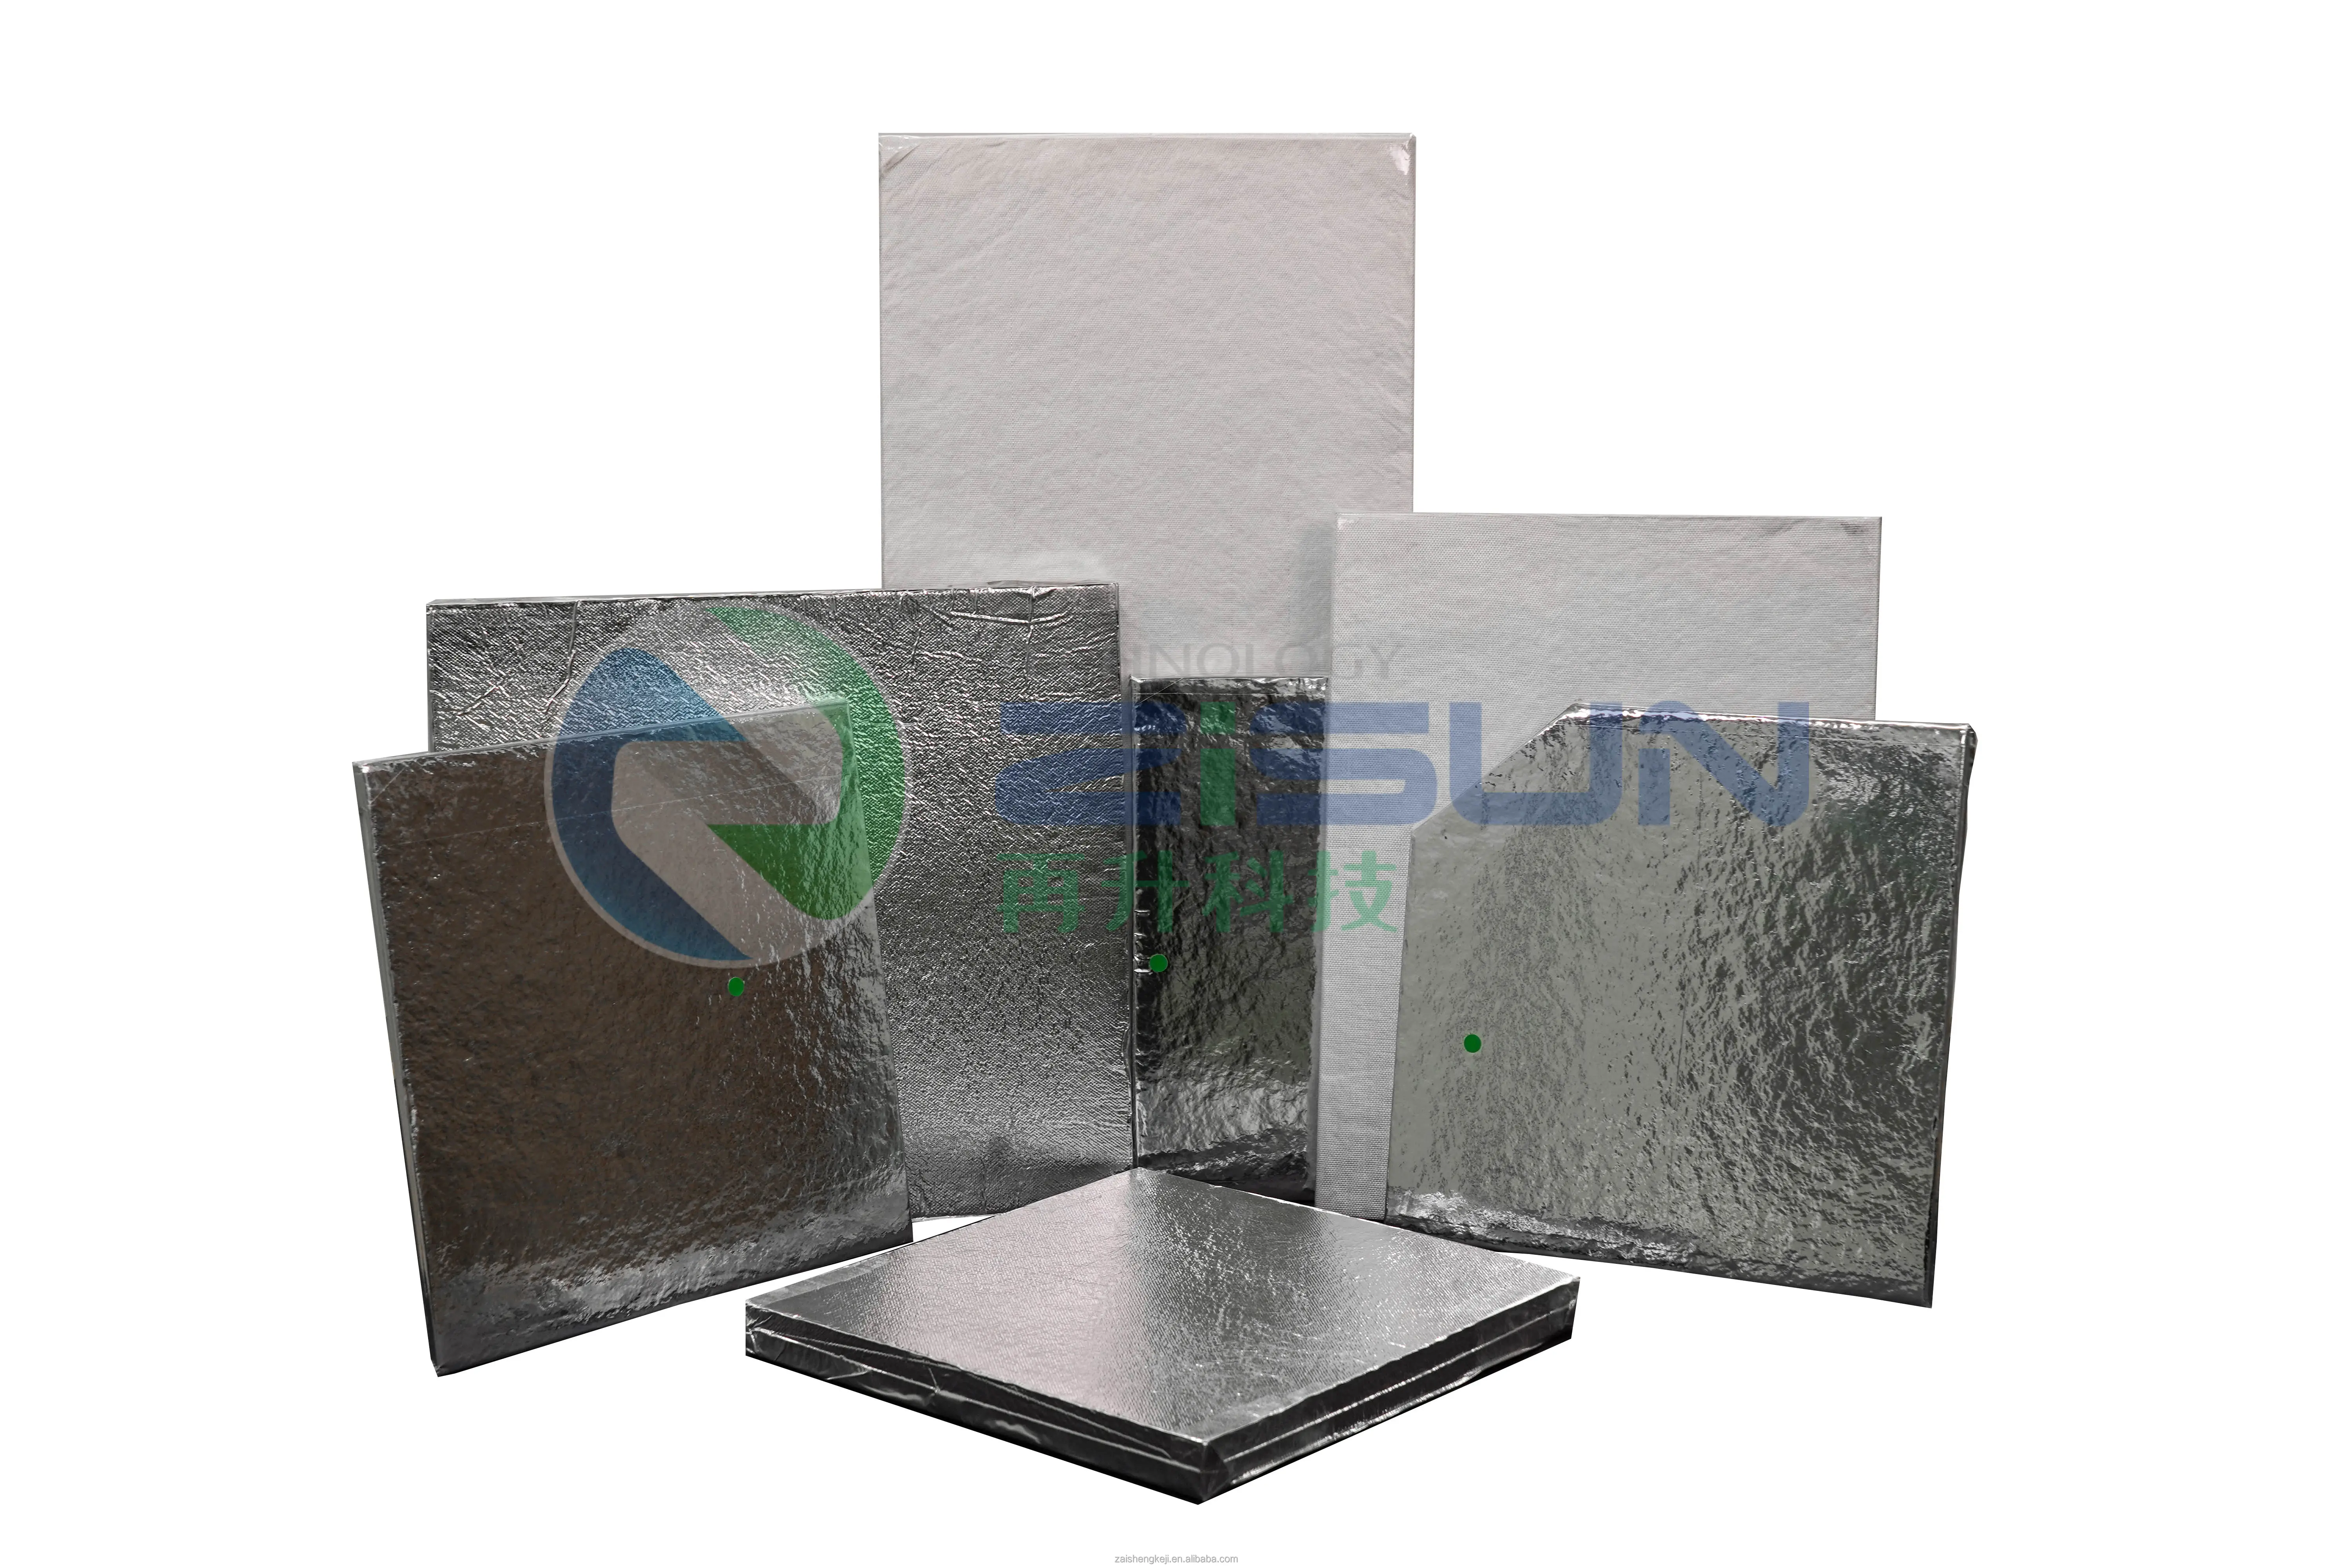 Factory Price Vacuum Insulation Panel VIP heat insulation for Refrigerator air conditioner and wall insulation